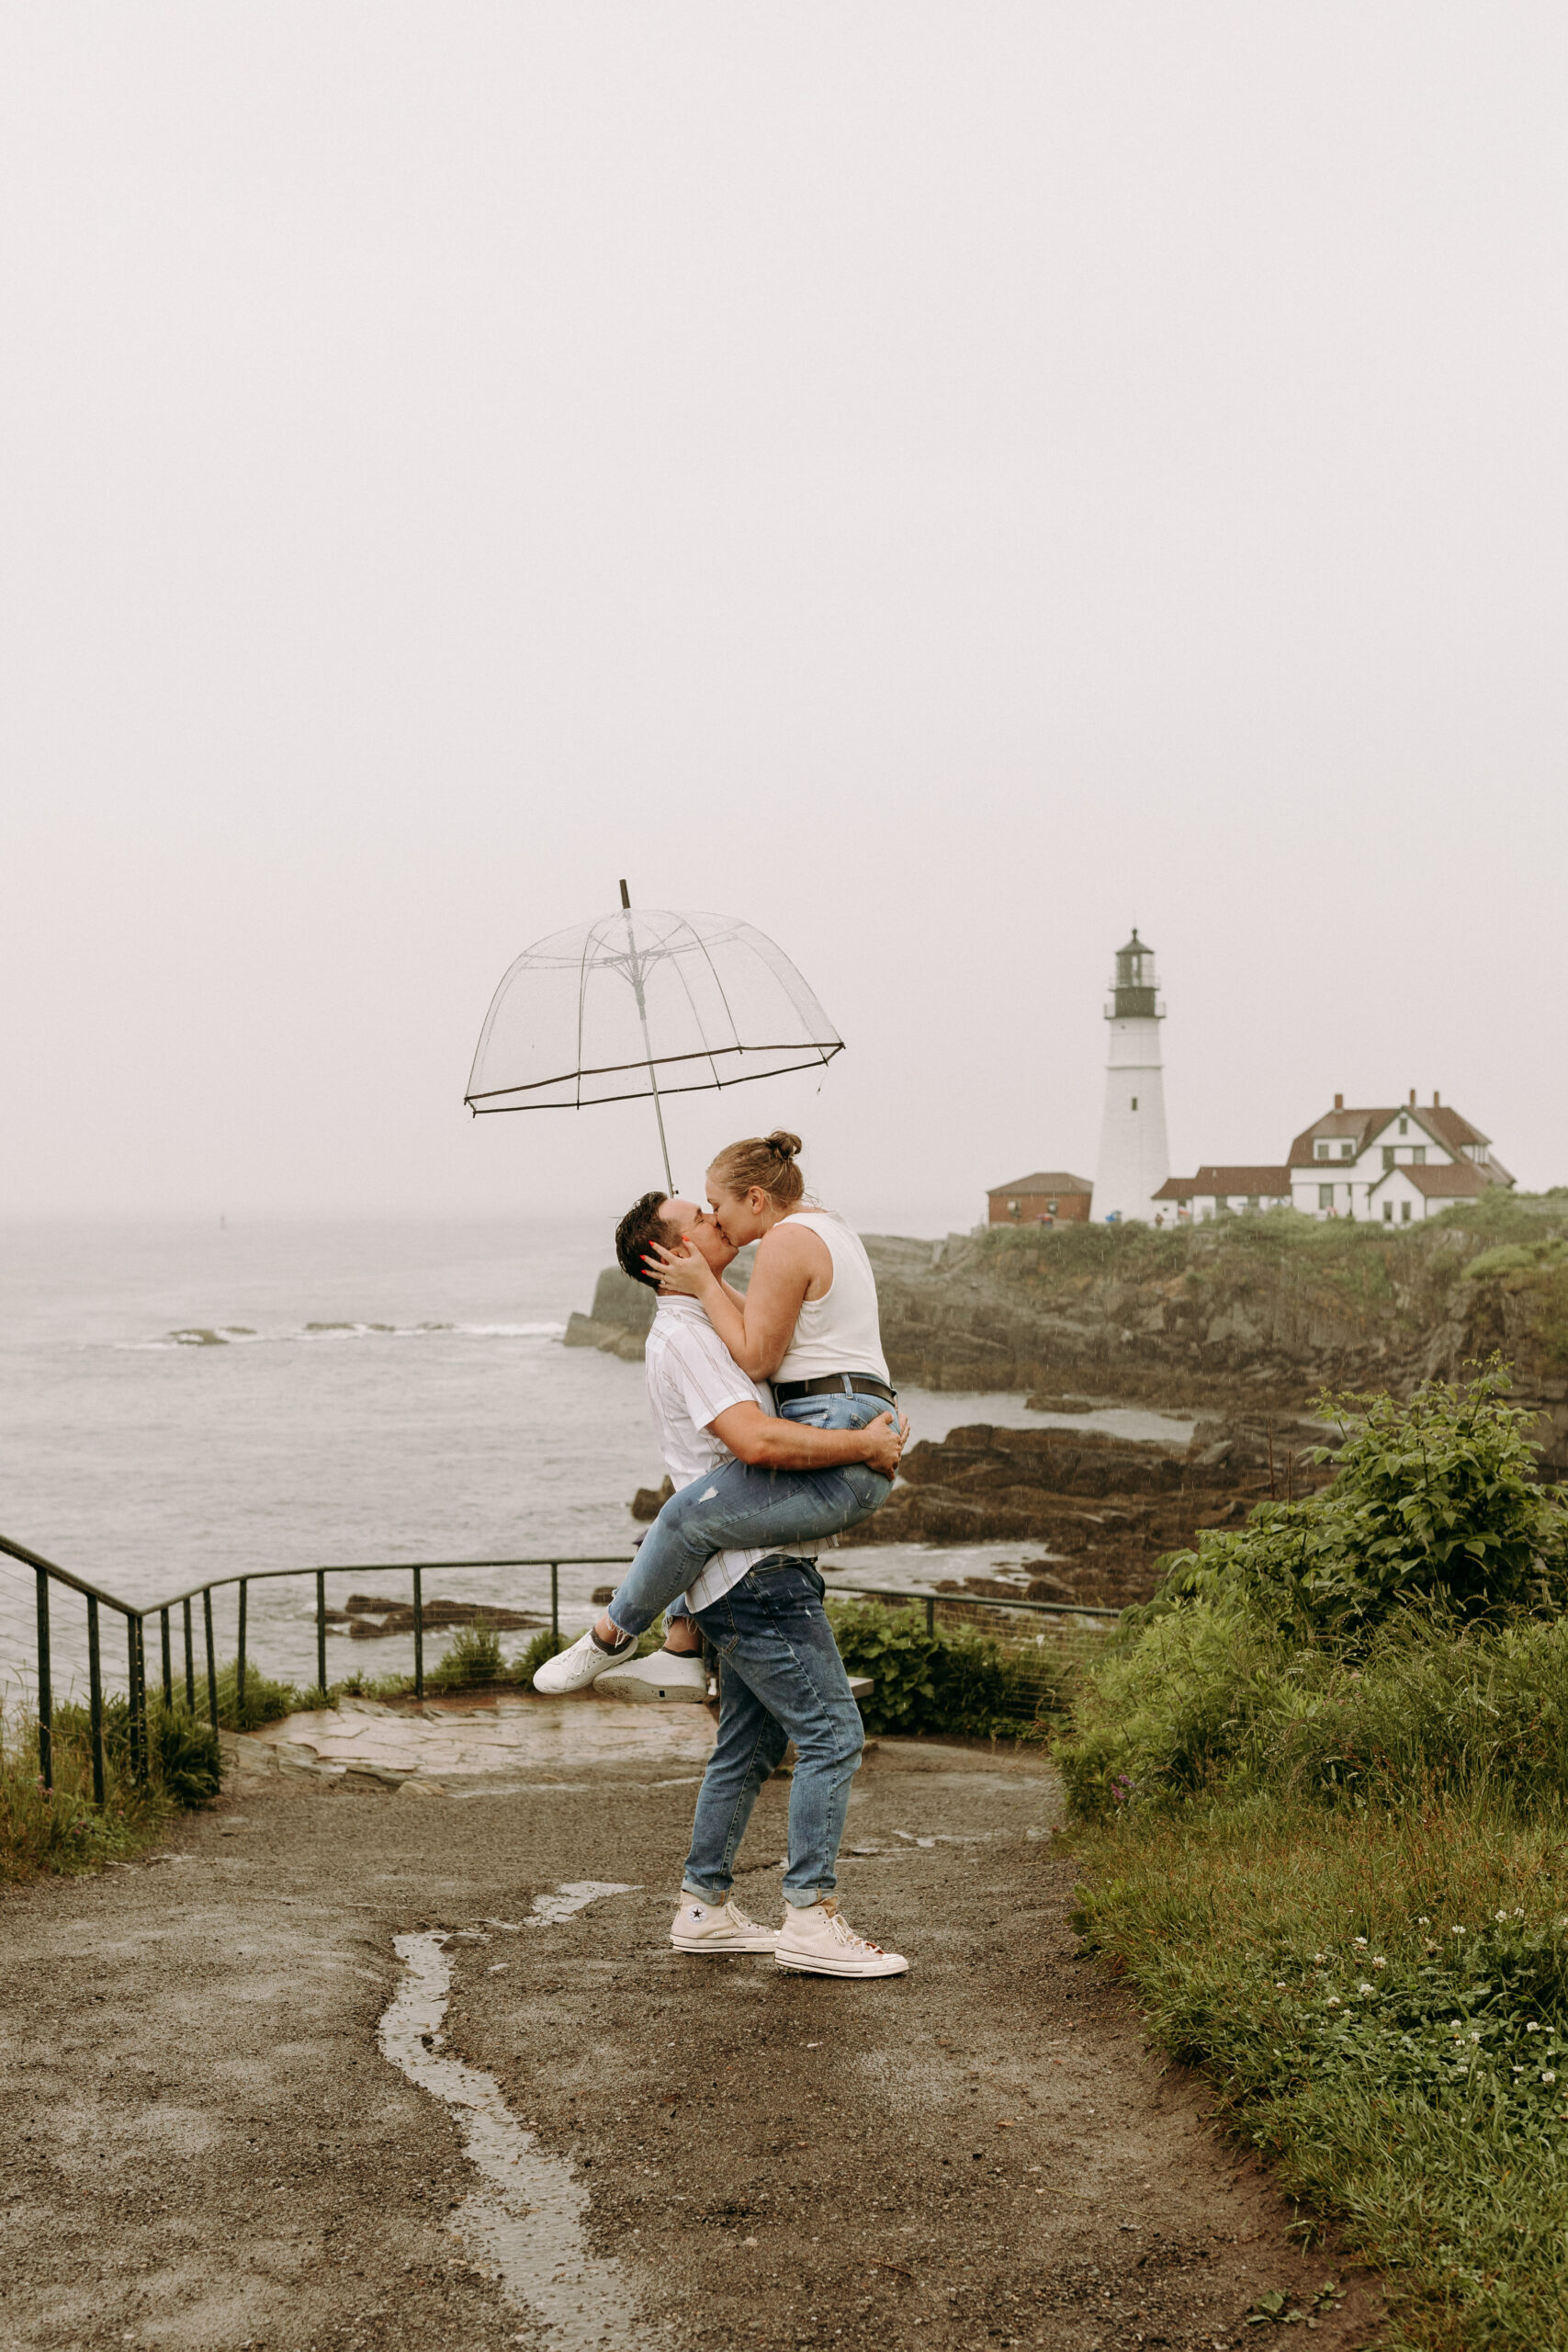 An affectionate couple sharing a tender kiss in front of Portland Head Light, Maine. The iconic lighthouse stands tall in the background, while the couple's silhouettes are framed against the overcast sky. Their love shines brightly amidst the misty and romantic ambiance of the rainy day.